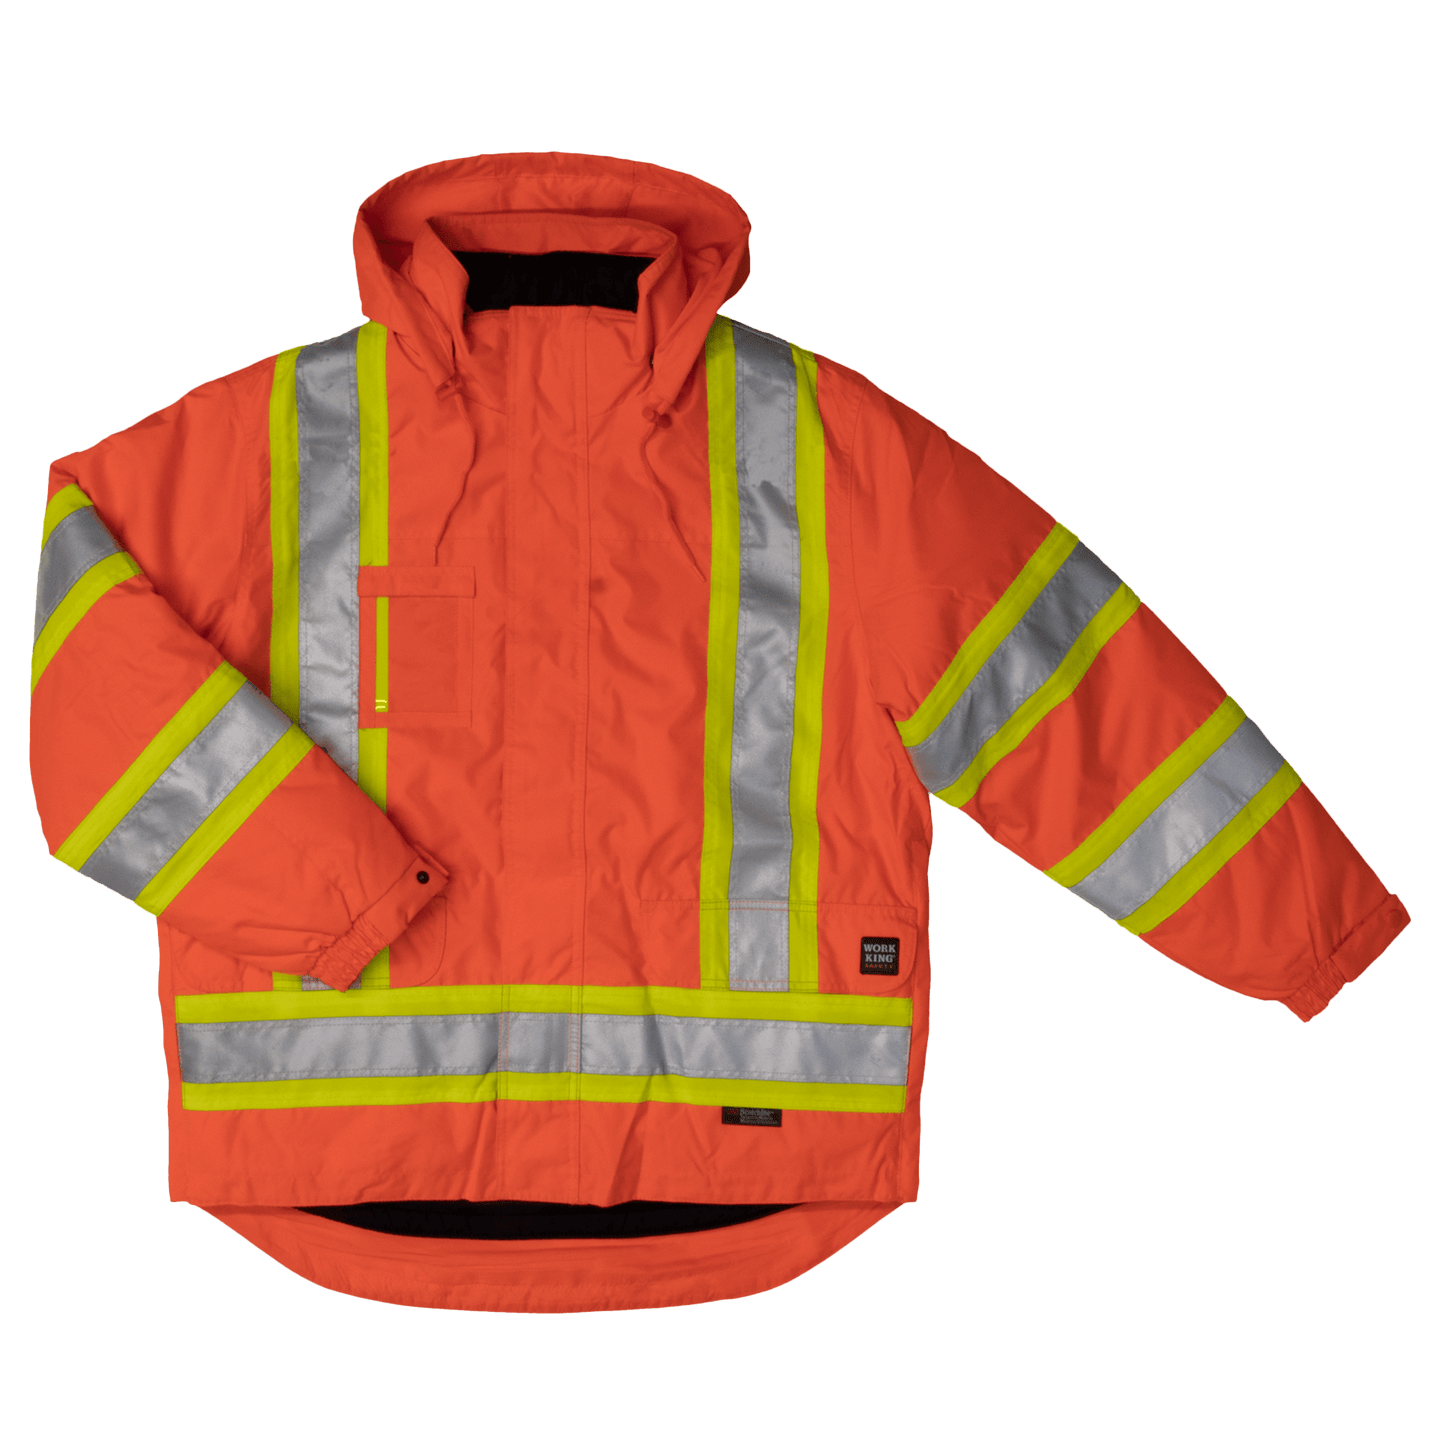 Tough Duck 5-in-1 Safety Jacket - S426 - Solid Orange